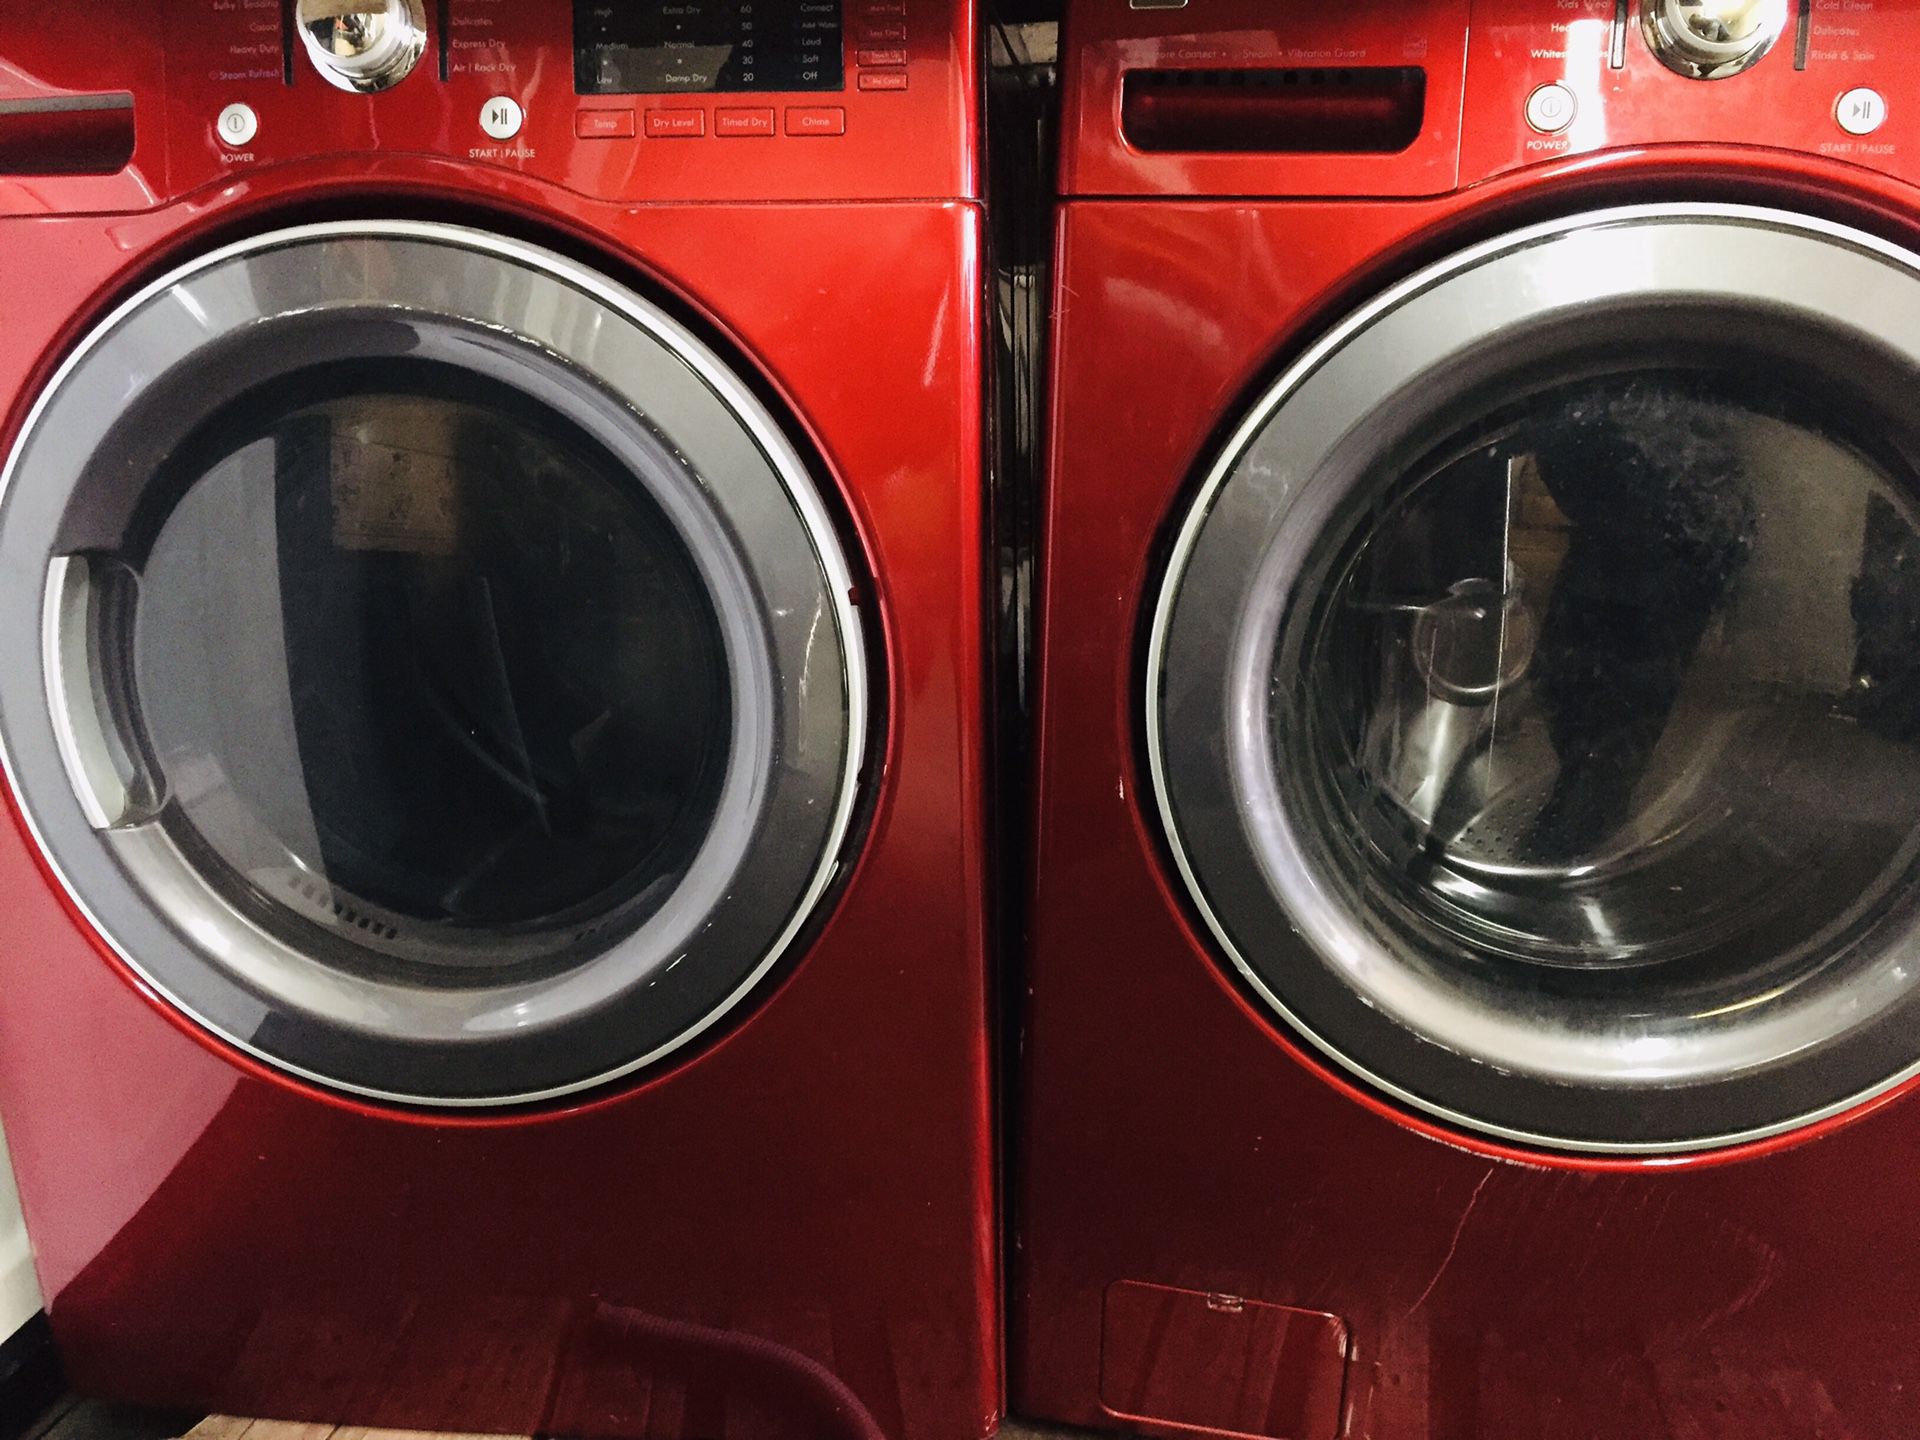 LG red extra large capacity front load washer and dryer set DELIVERY